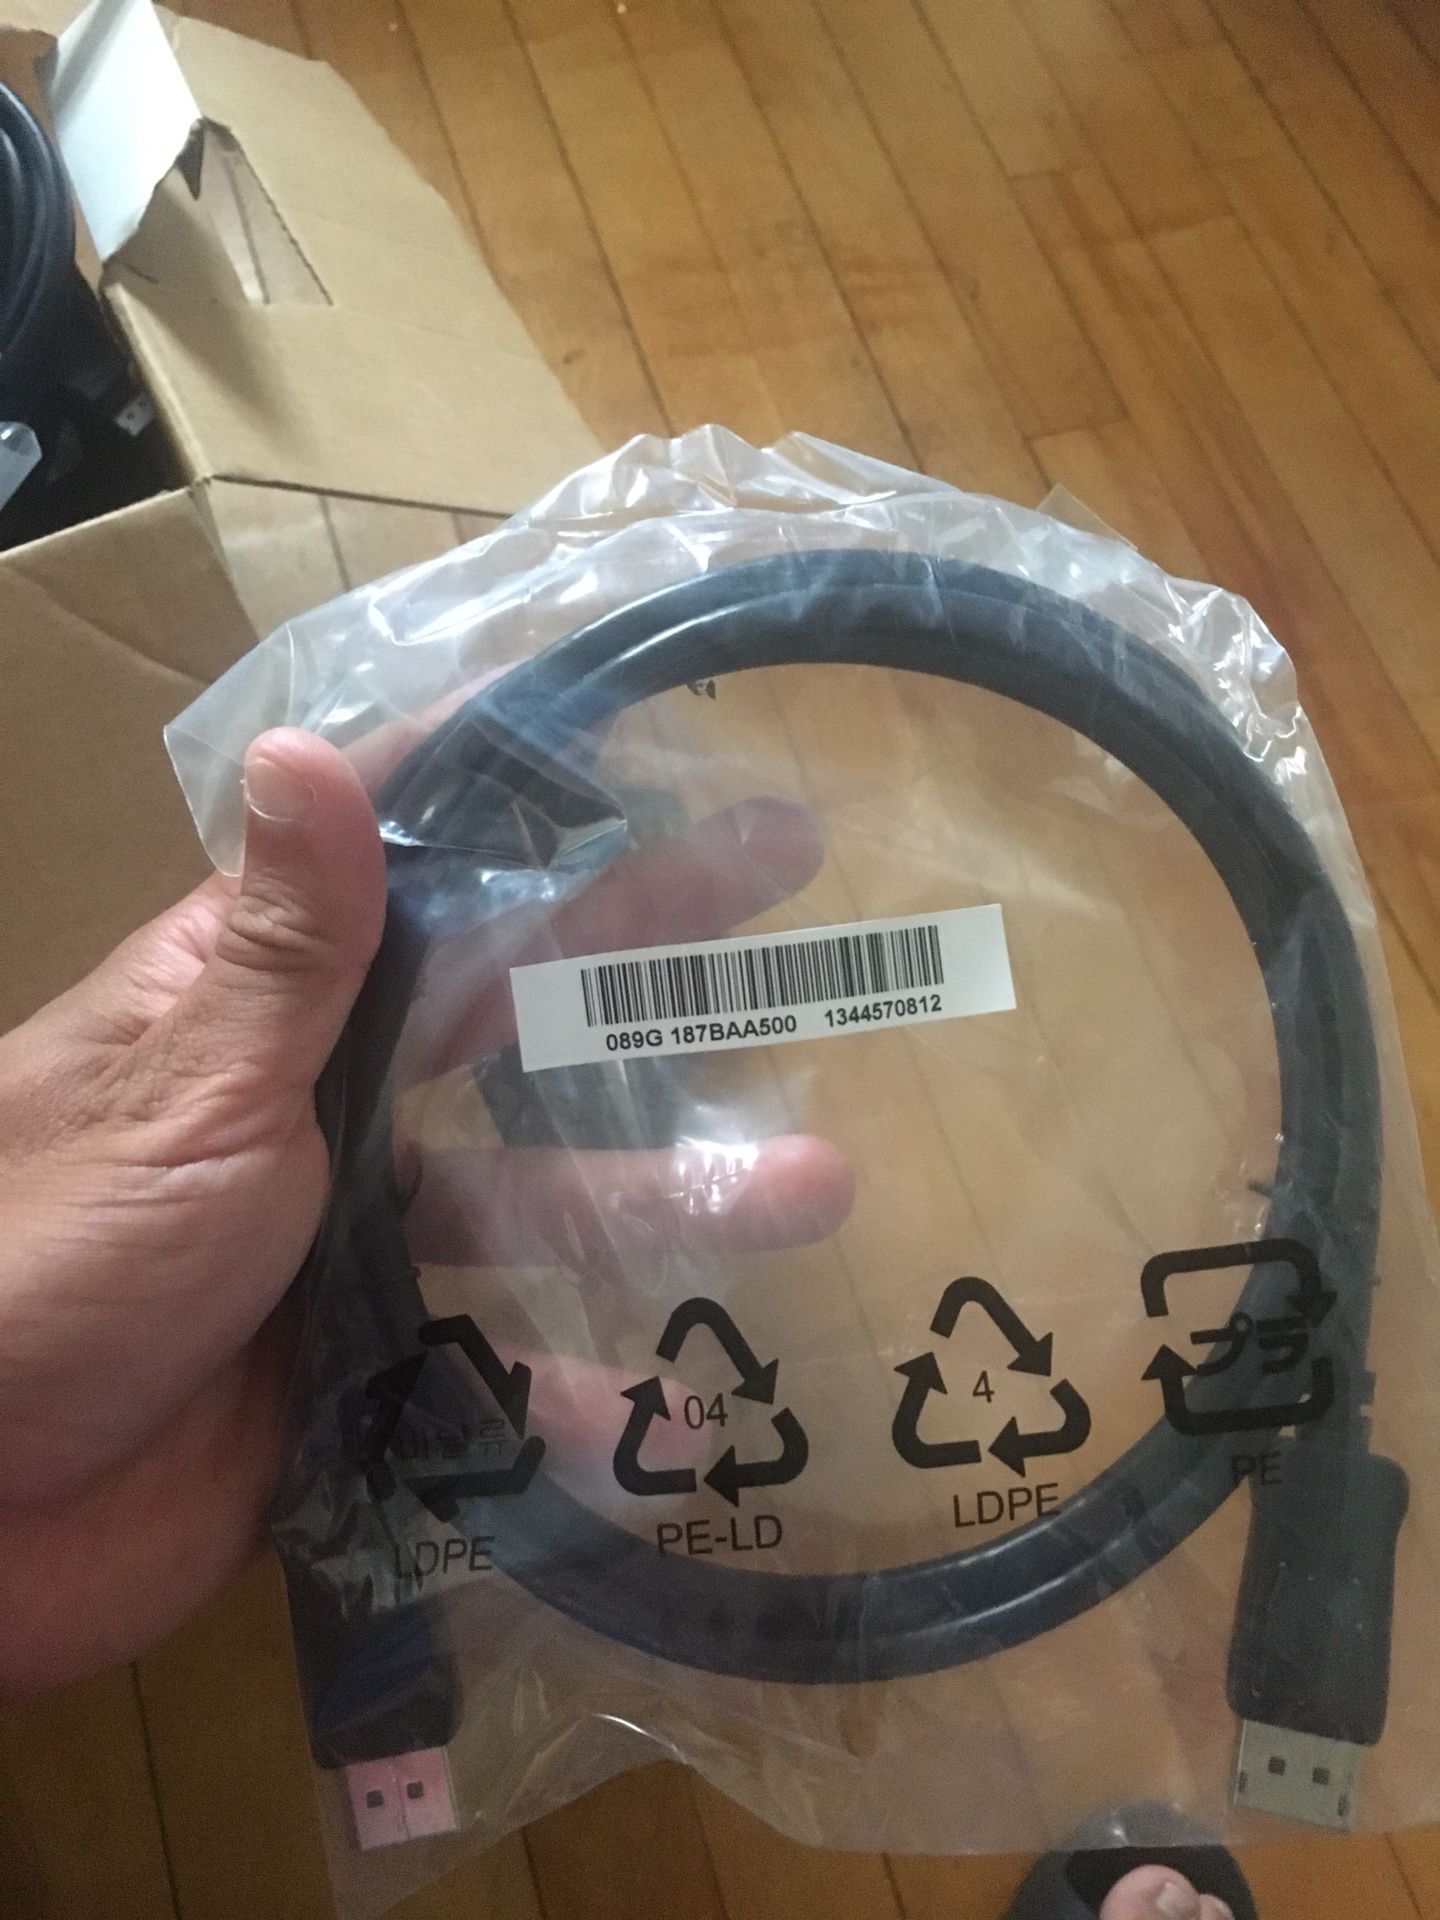 PC HOOKUP CABLES